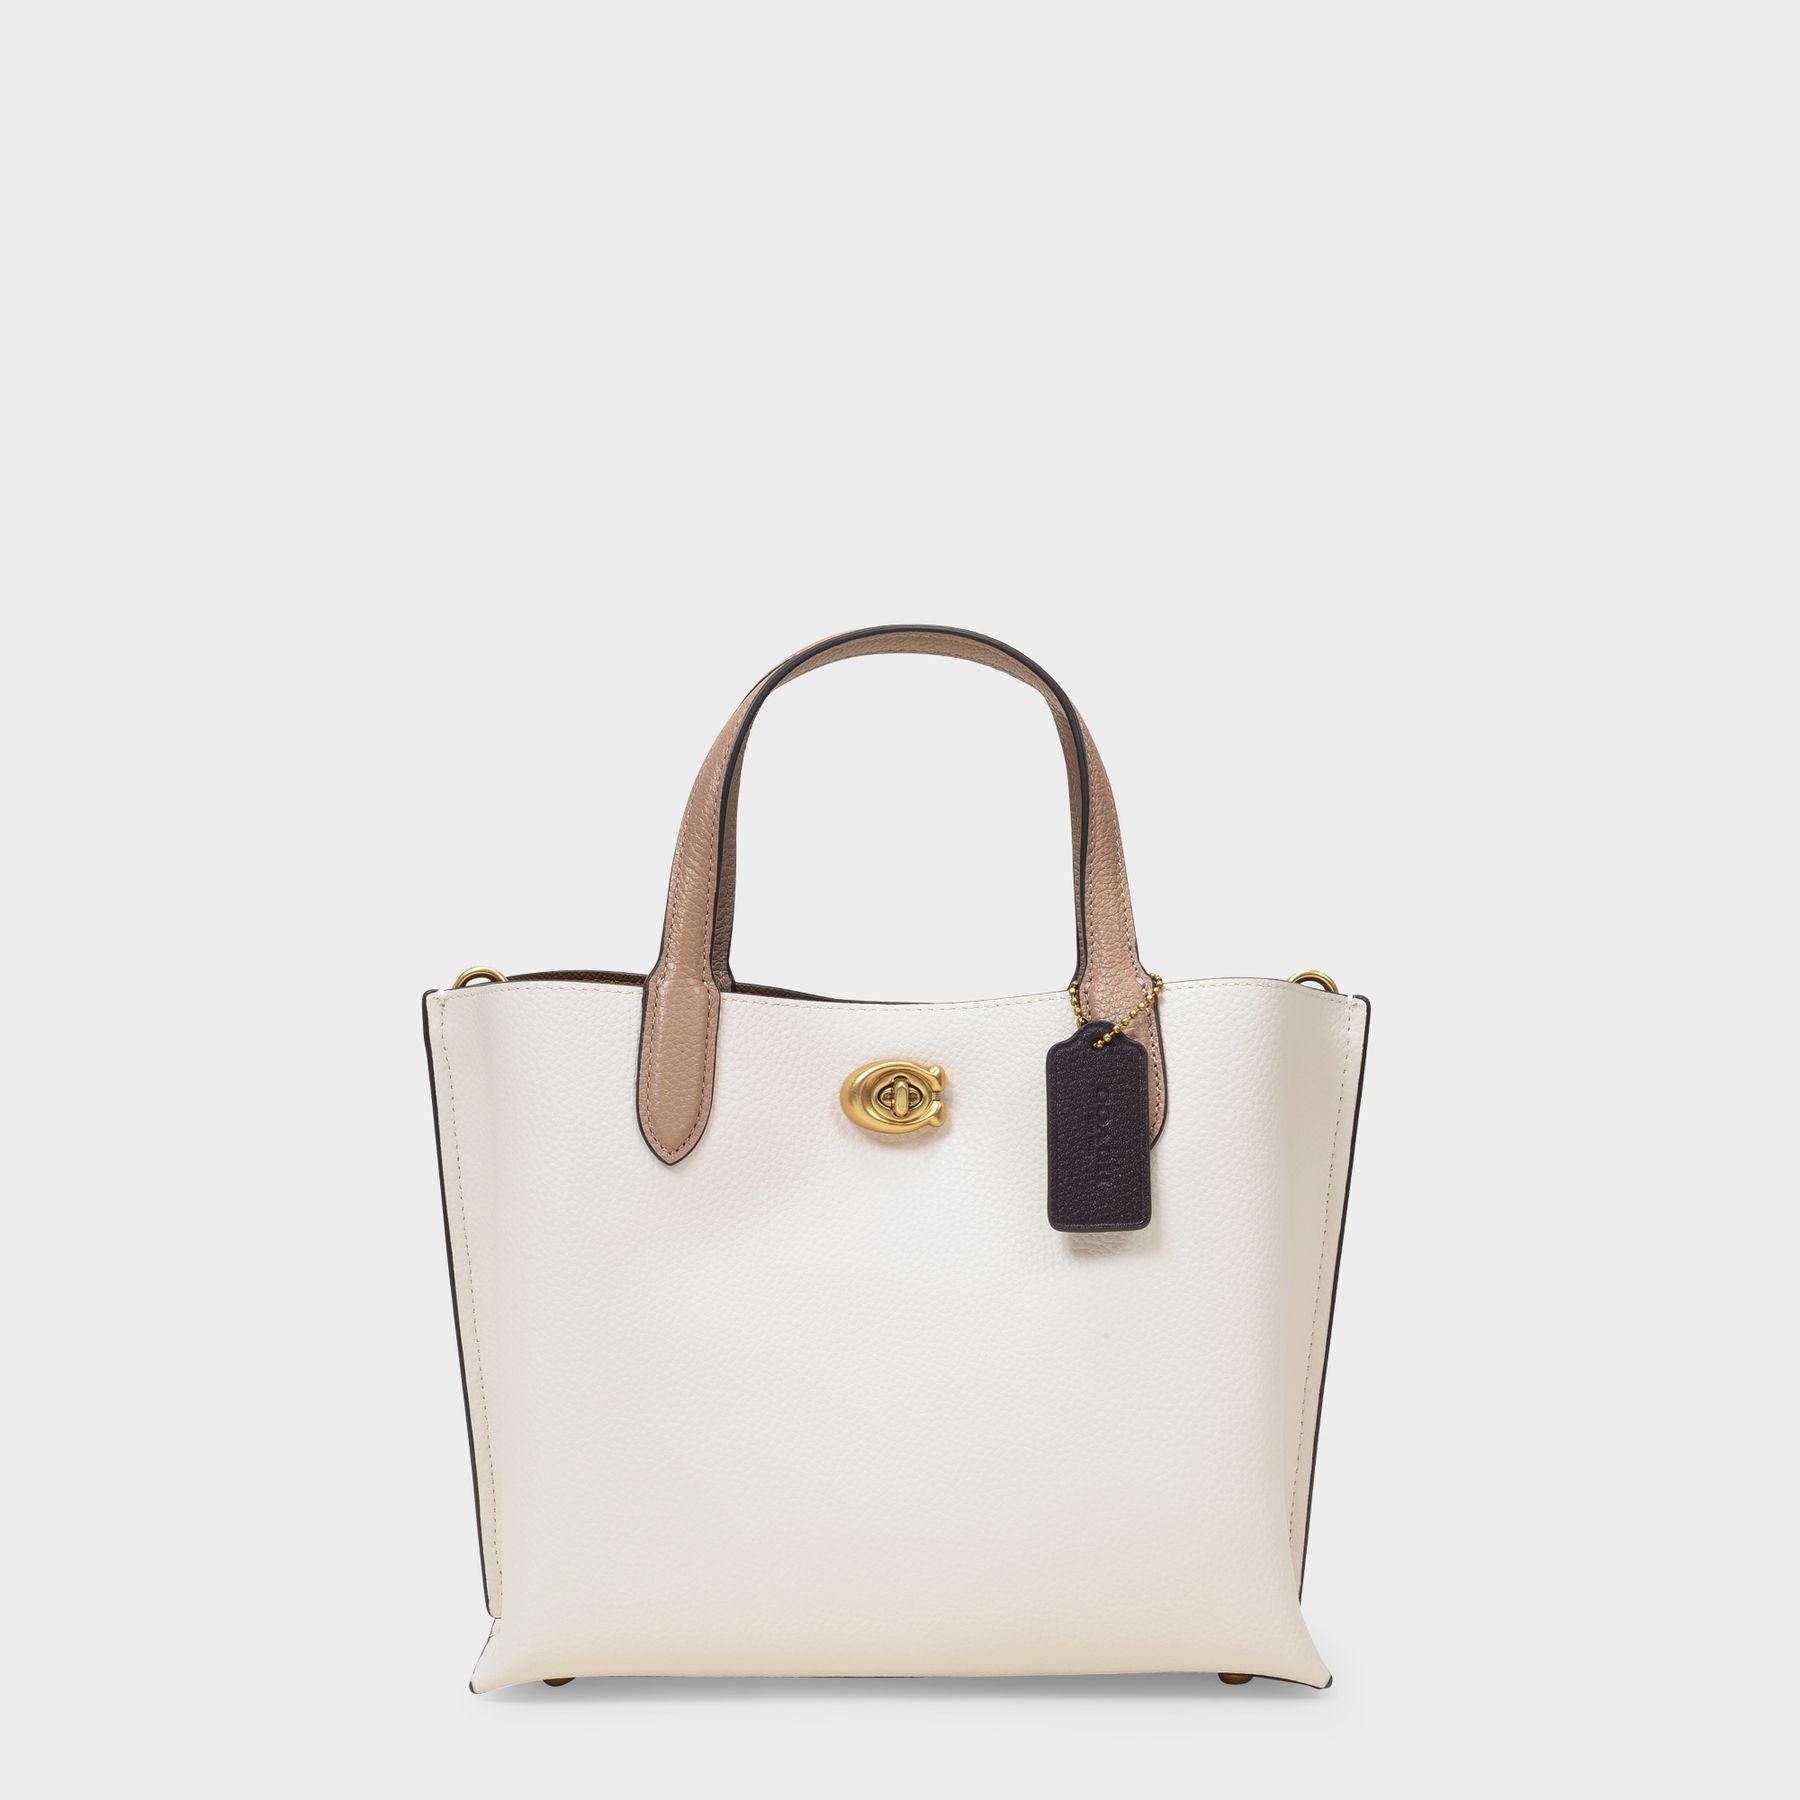 COACH Willow 24 Beige Colorblock Gold Tone Leather Tote Bag